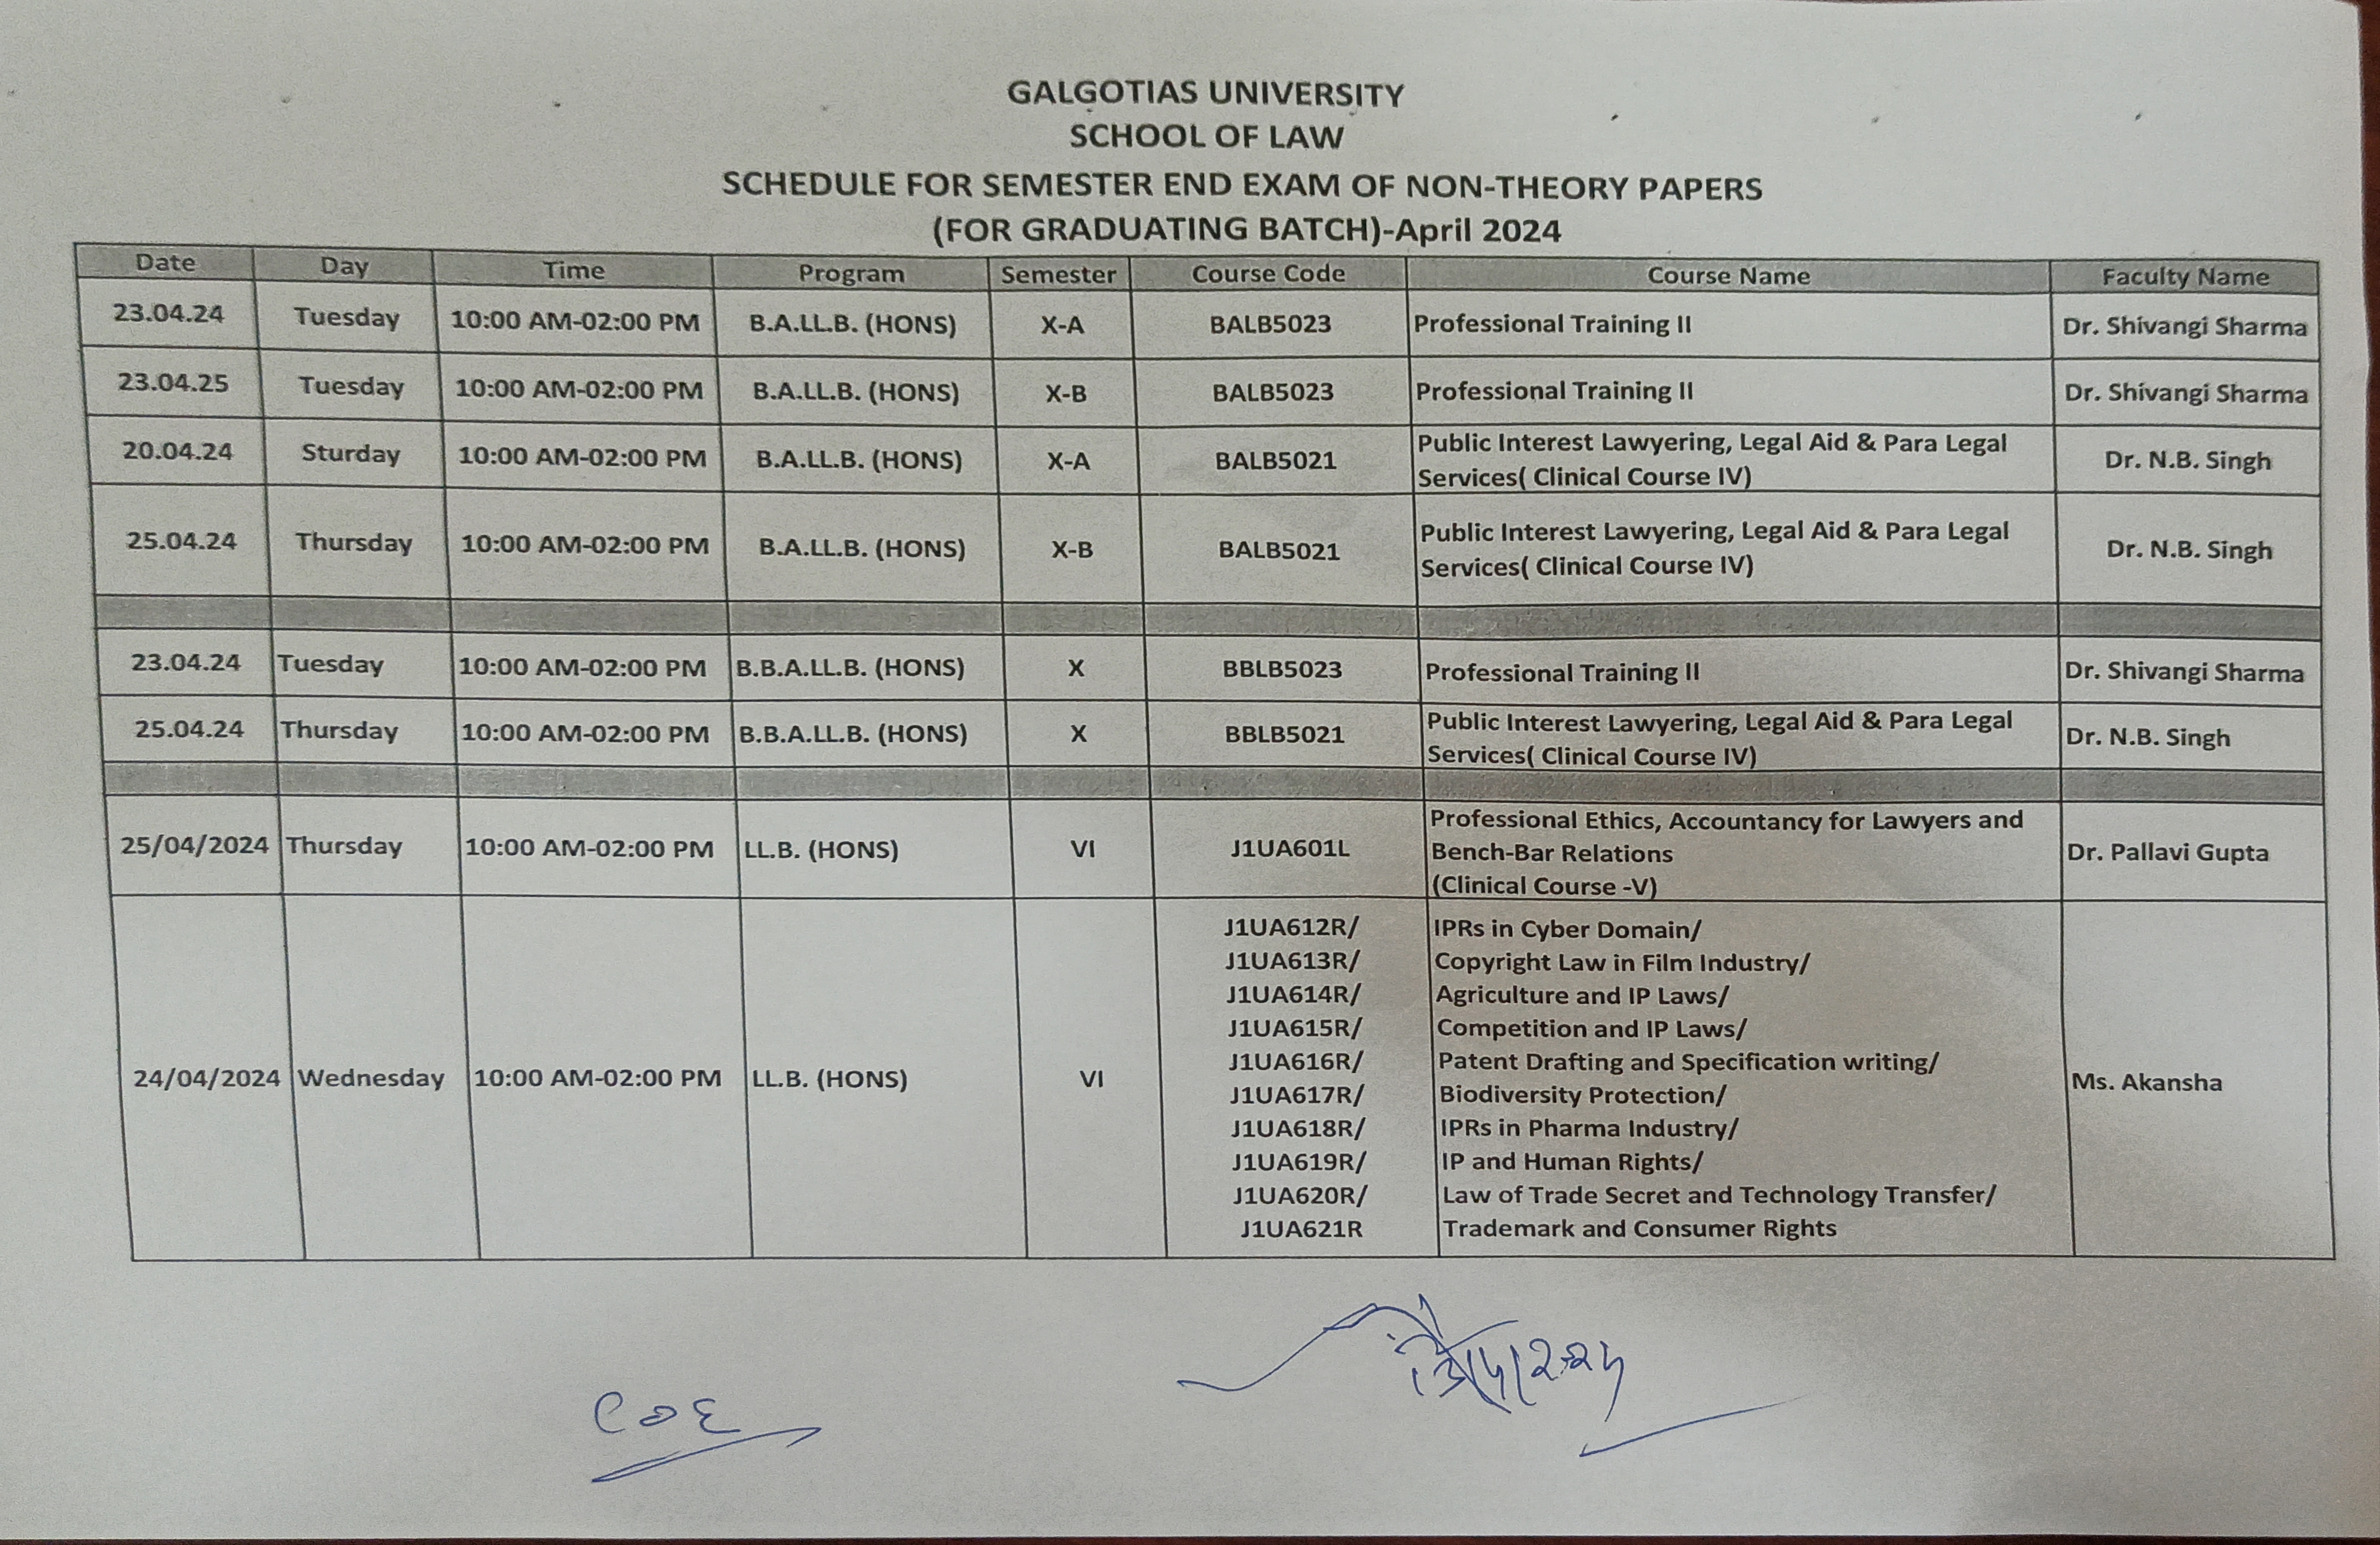 Attachment Schedule of SEE Non Theory Courses (Graduating Batch).jpg